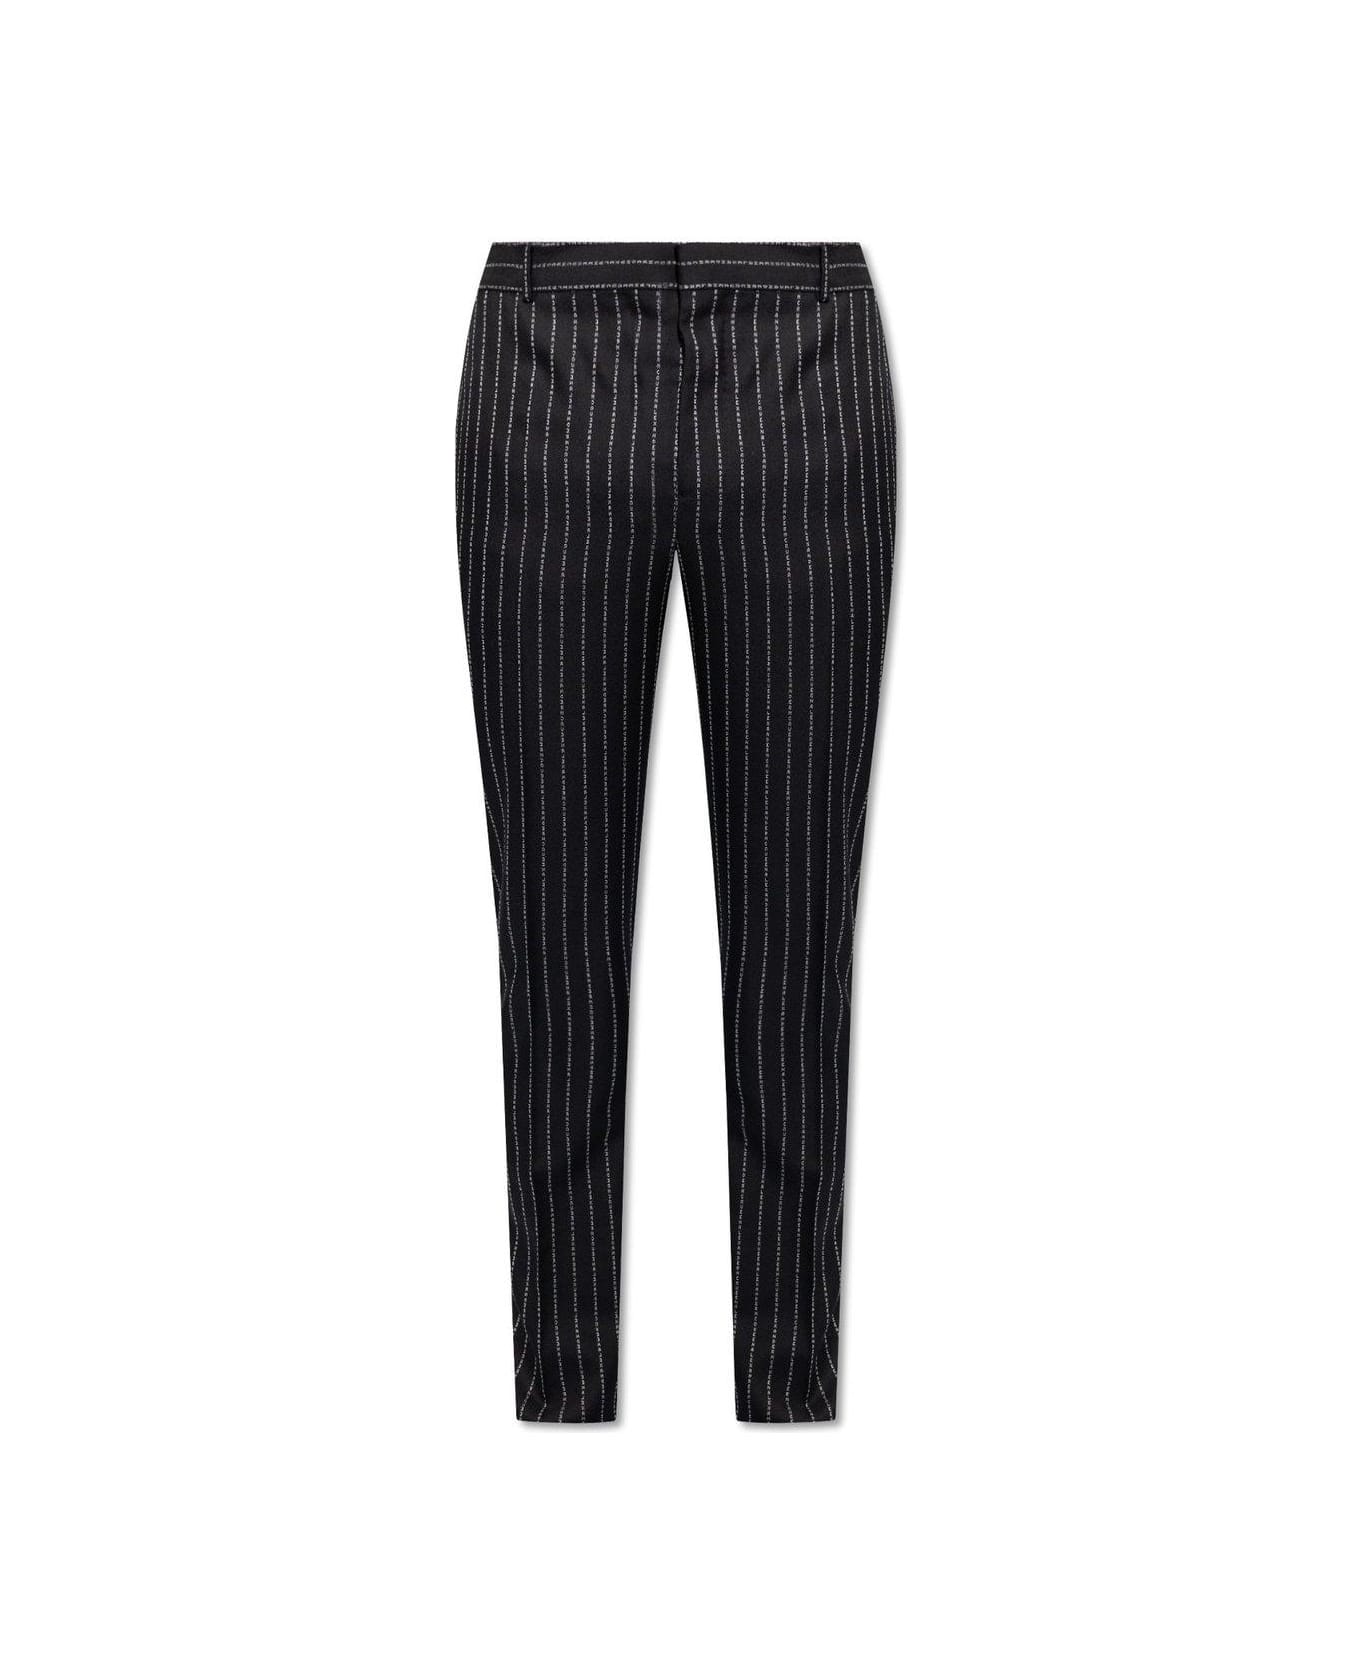 Alexander McQueen Pinstriped Front Trousers - Black